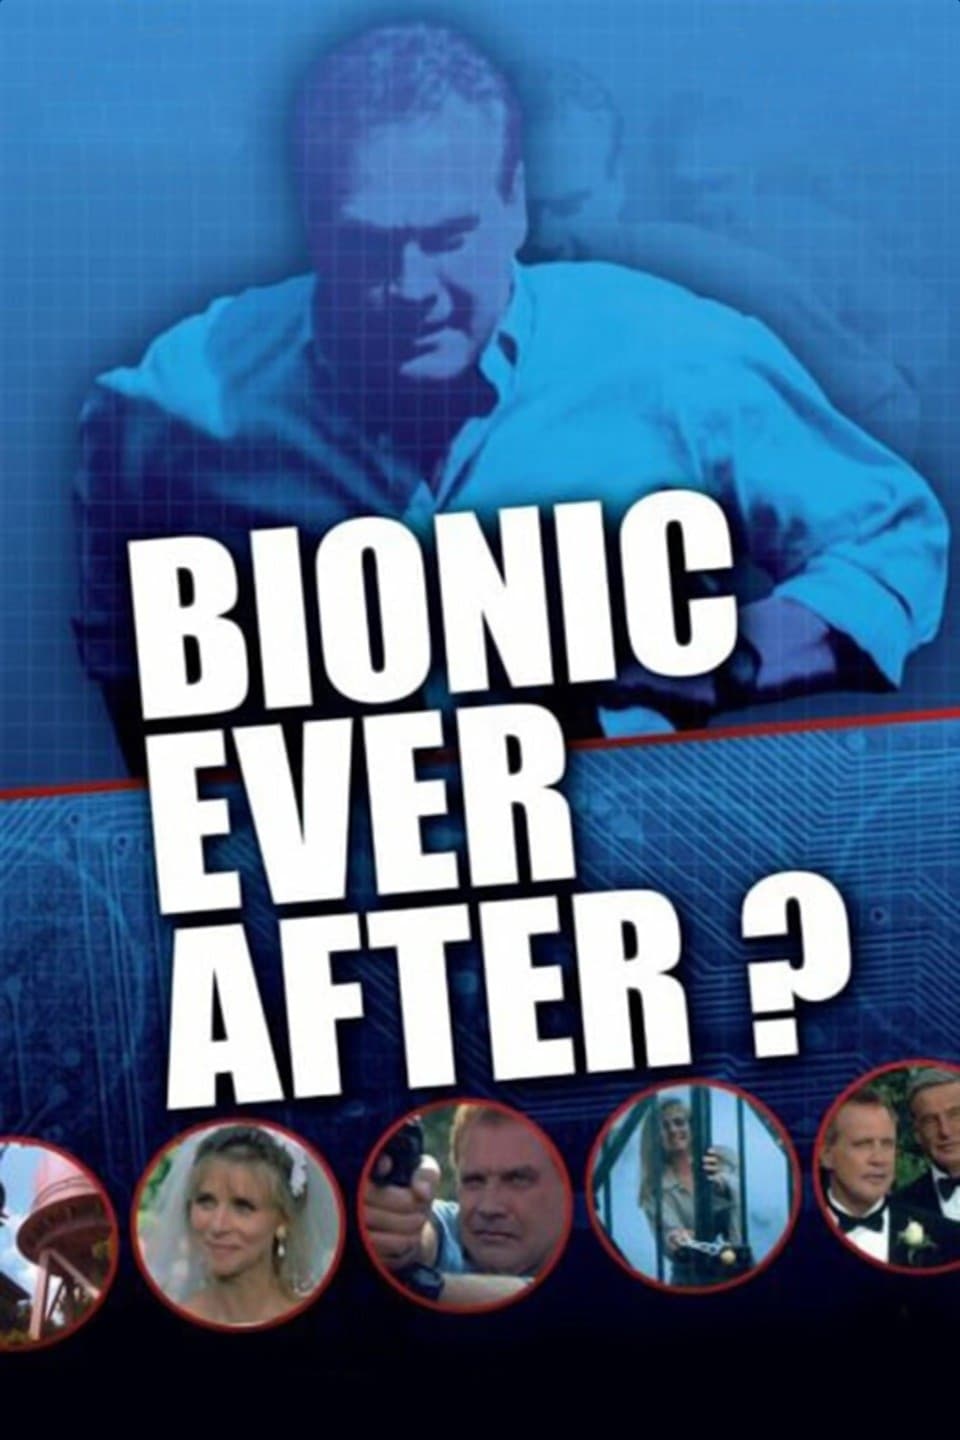 Bionic Ever After? (1994)